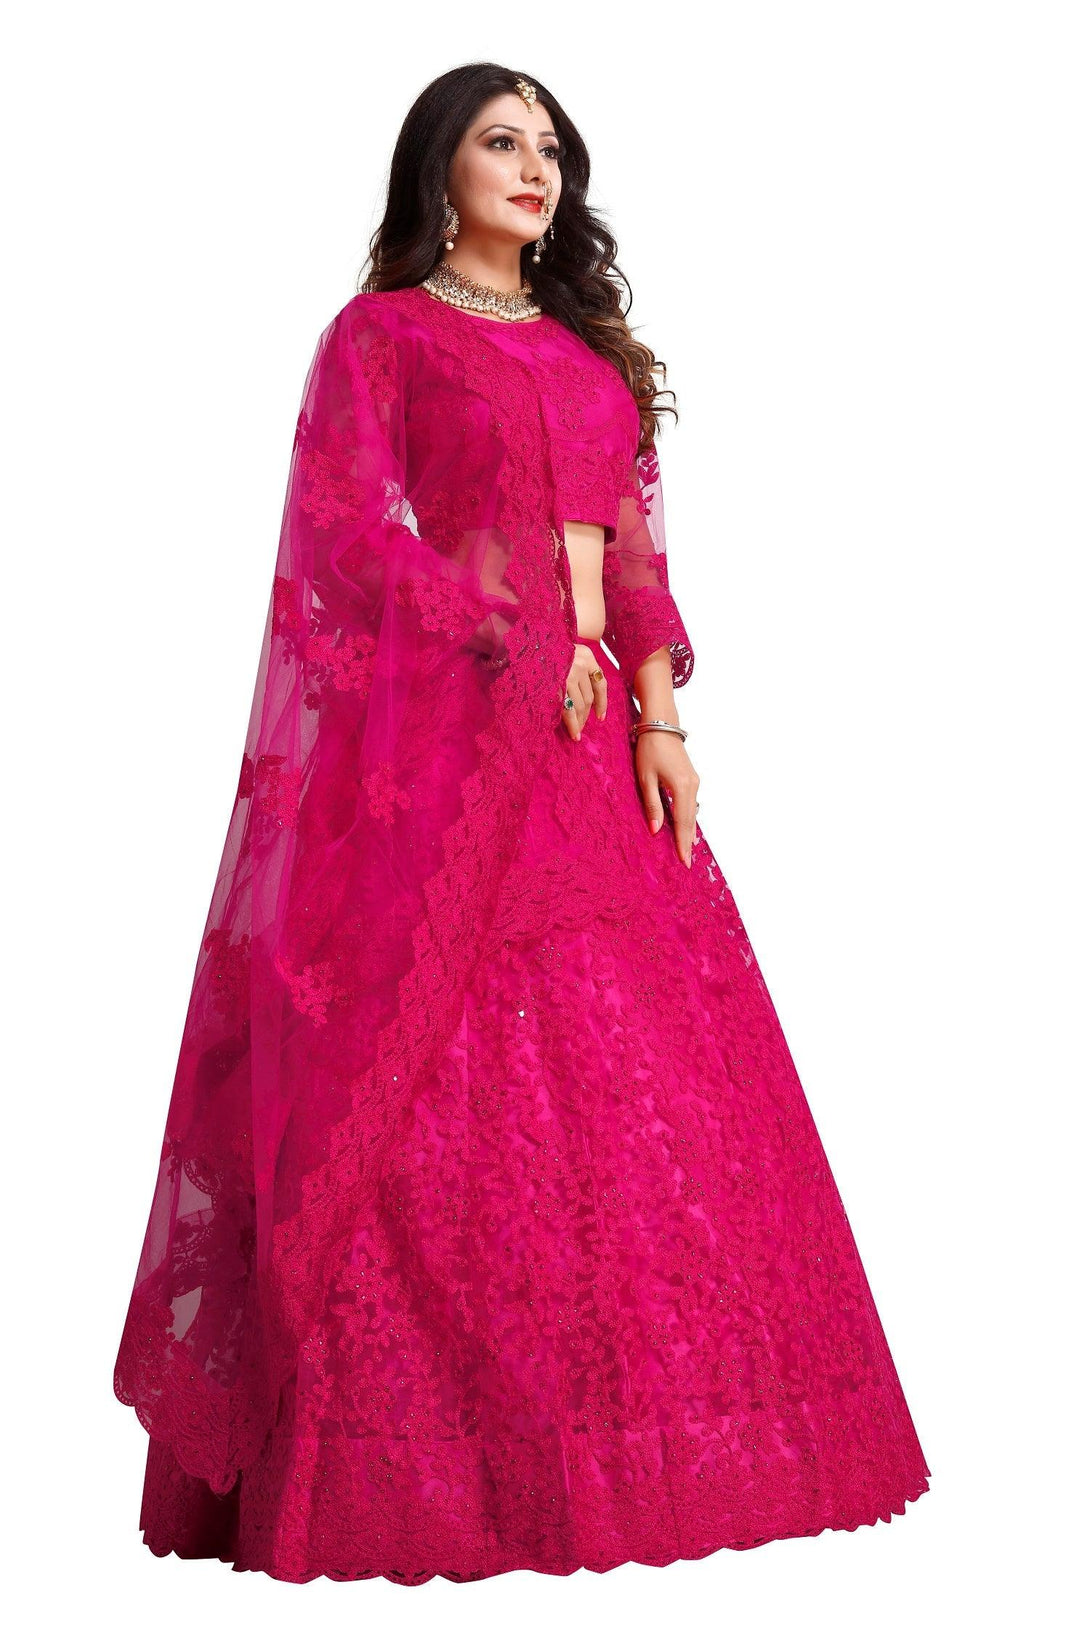 Dark Pink Net Lehenga Choli with Floral Embroidery - Indiakreations